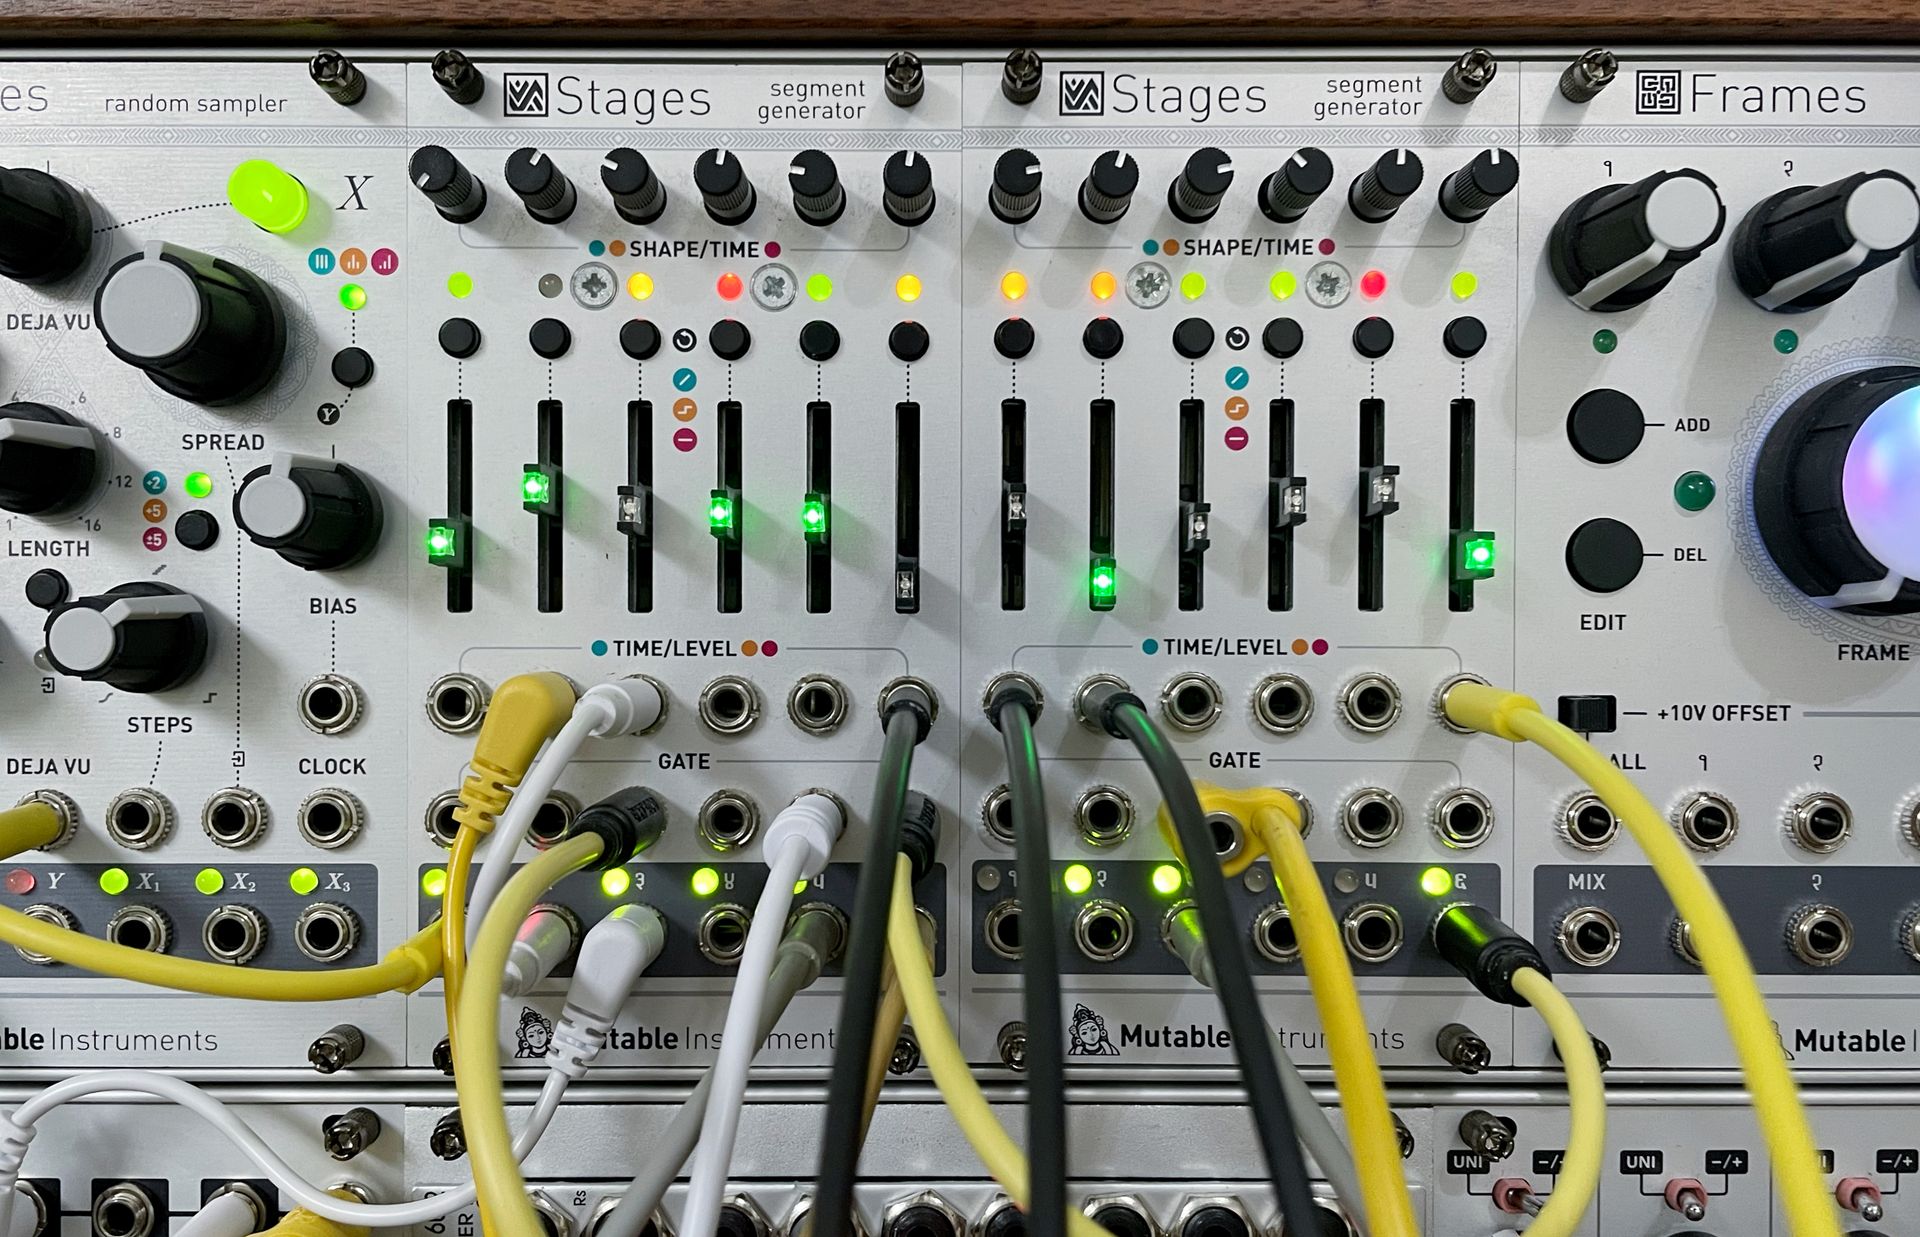 A maximalist manual for the Stages Eurorack module and some digressions on abstraction in modular synthesis.